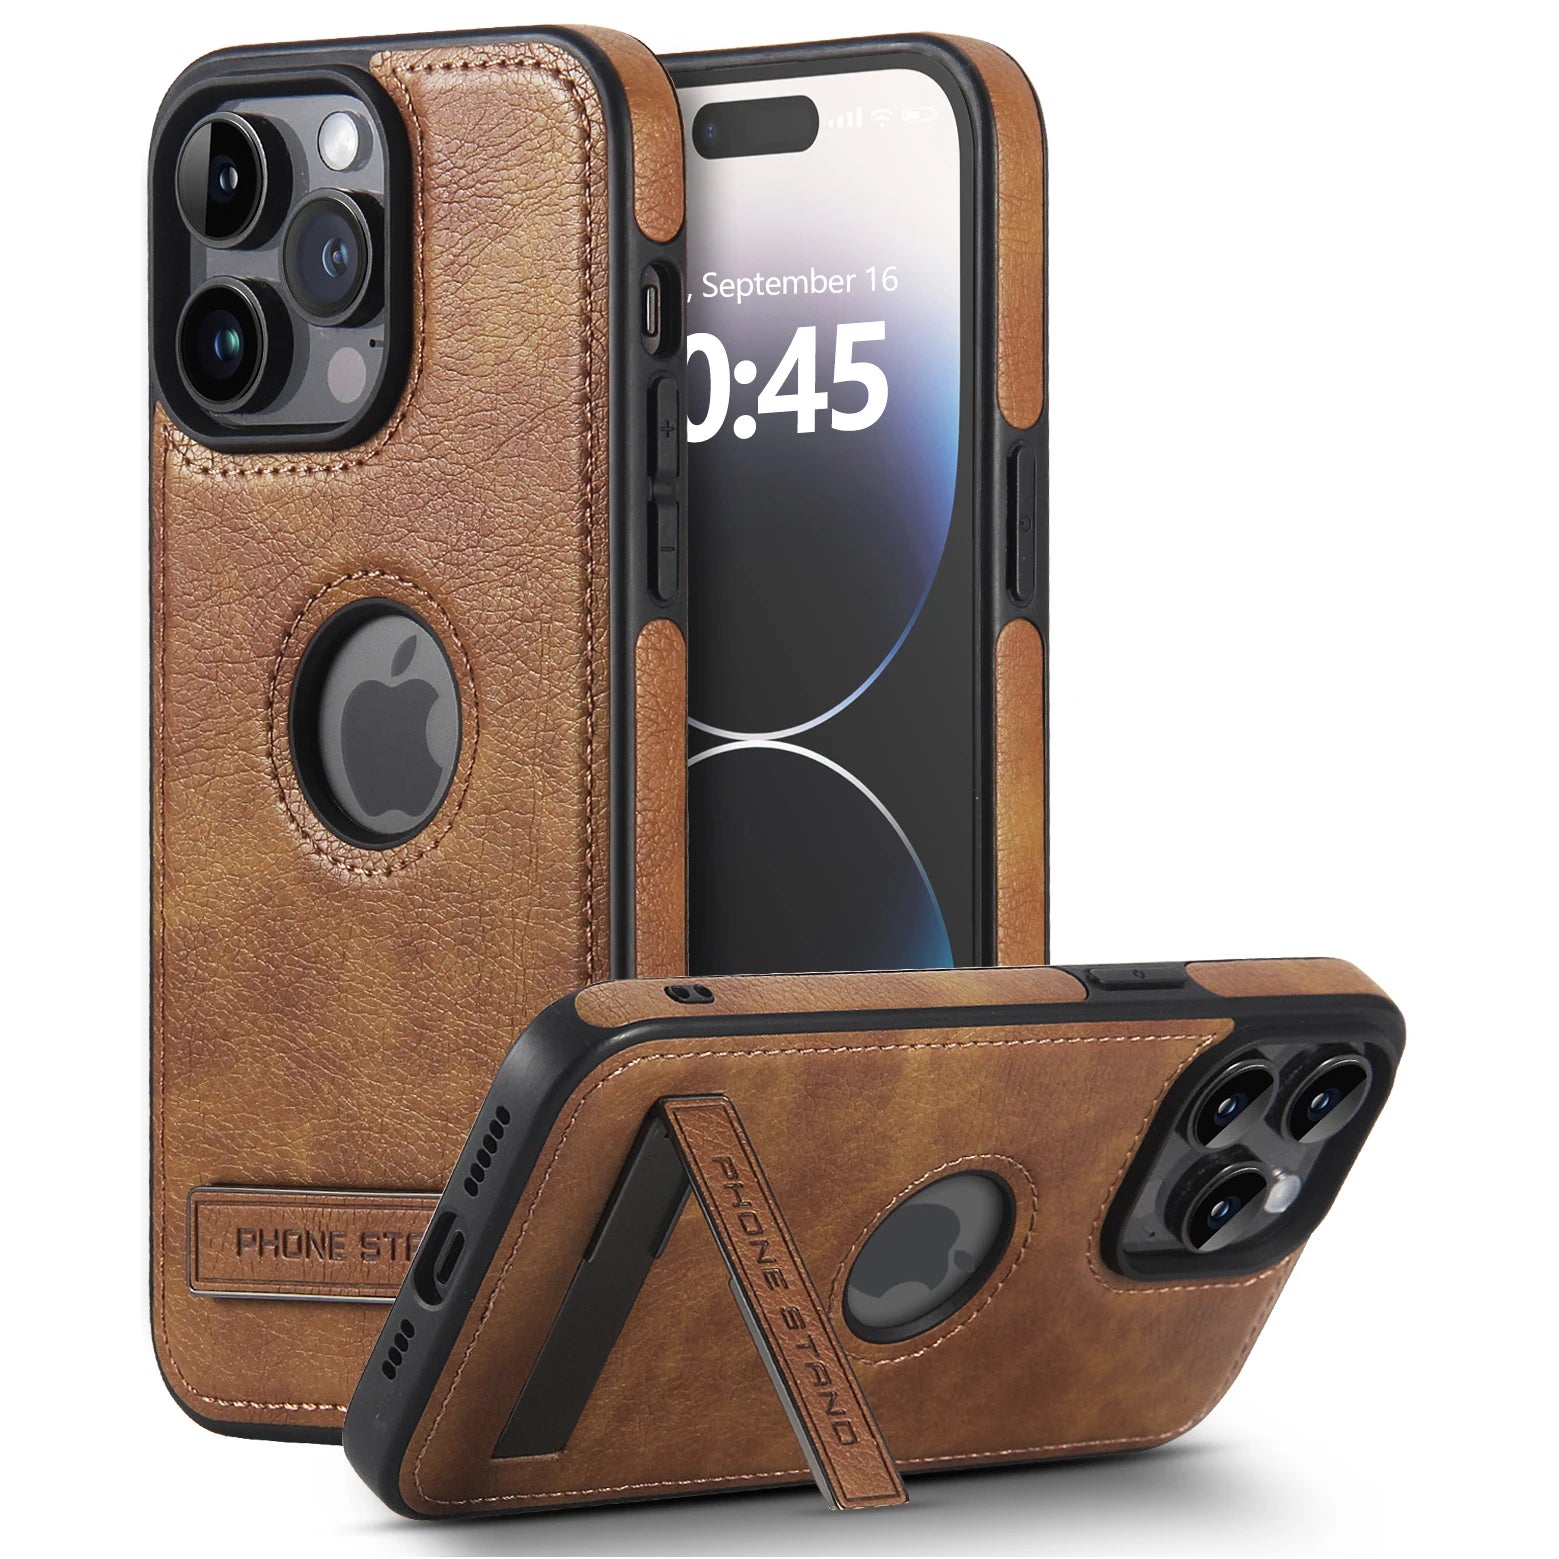 Leather Wallet Case for iPhone with folding bracket and shockproof back